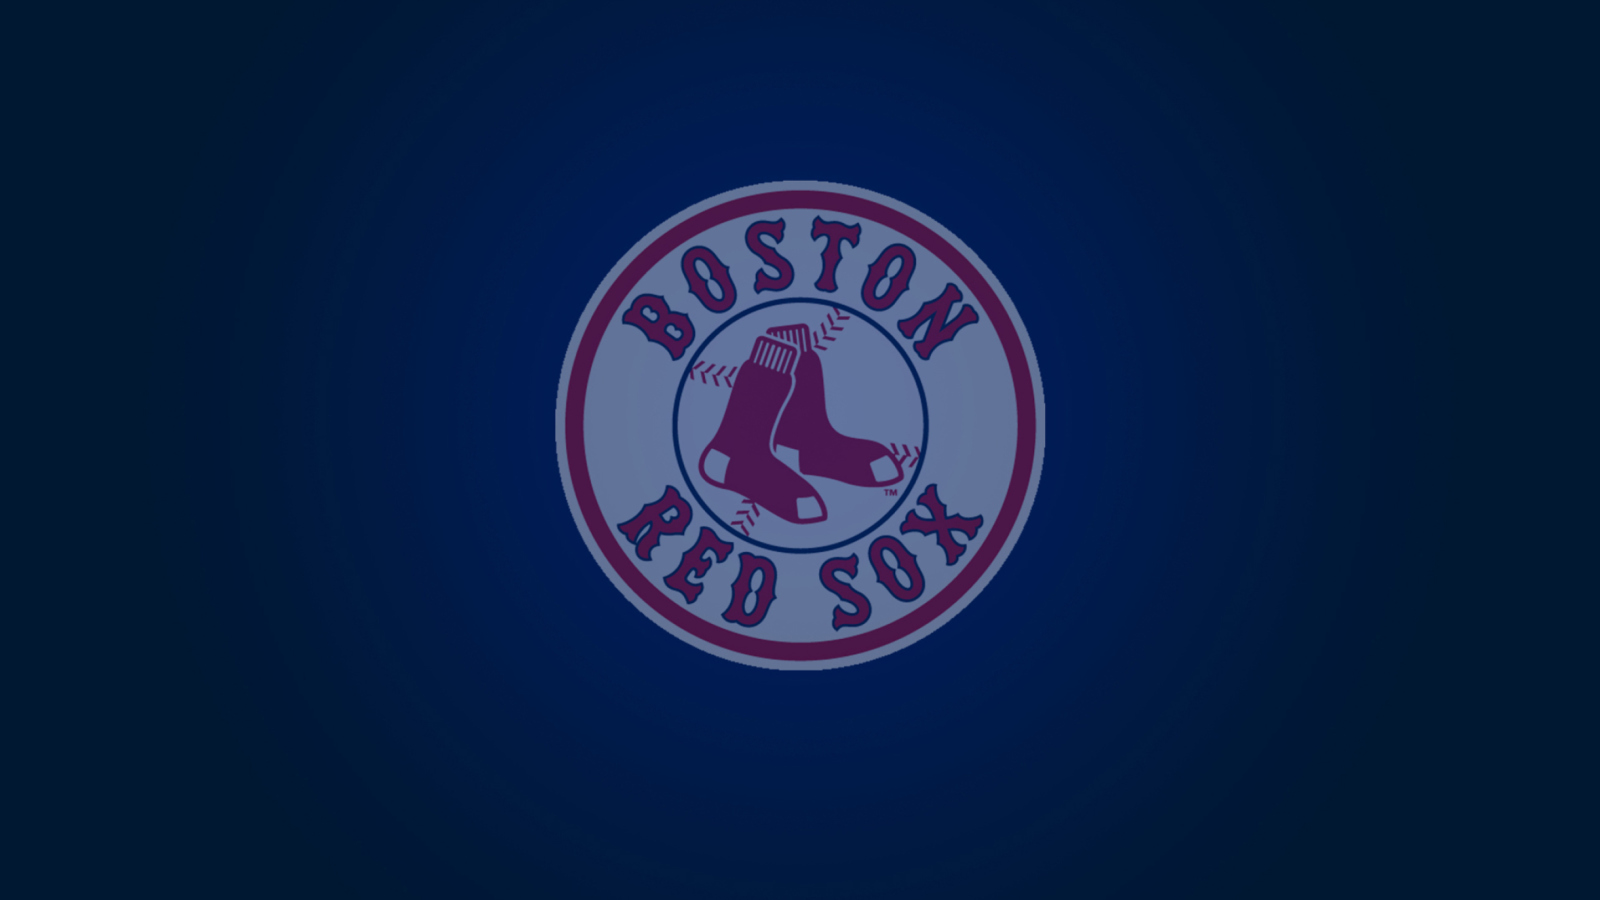 Boston Red Sox Wallpaper Images 1600x900PX ~ Red Sox Wallpaper #111277